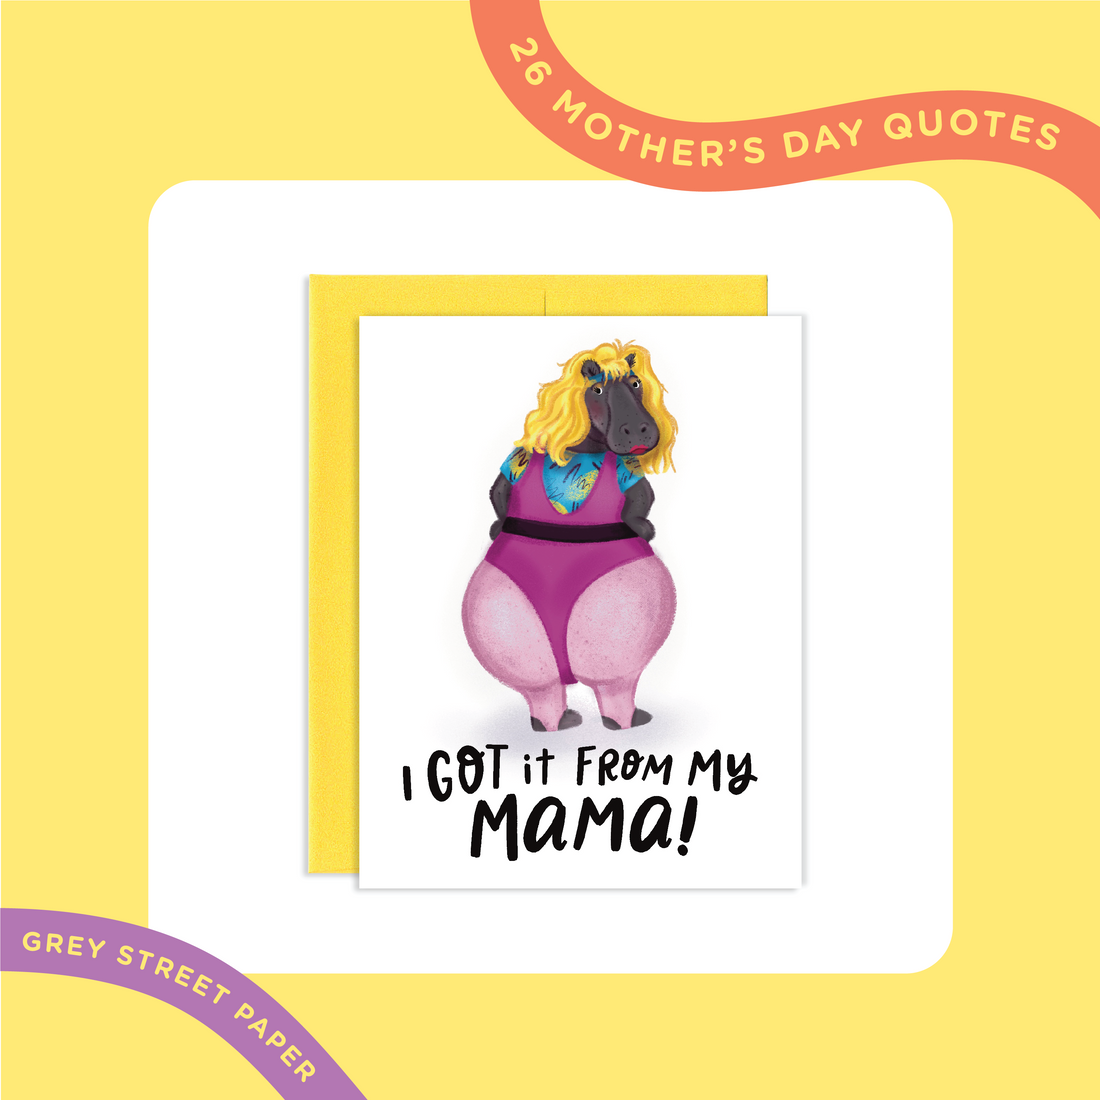 26 Quotes for Mother's Day Cards